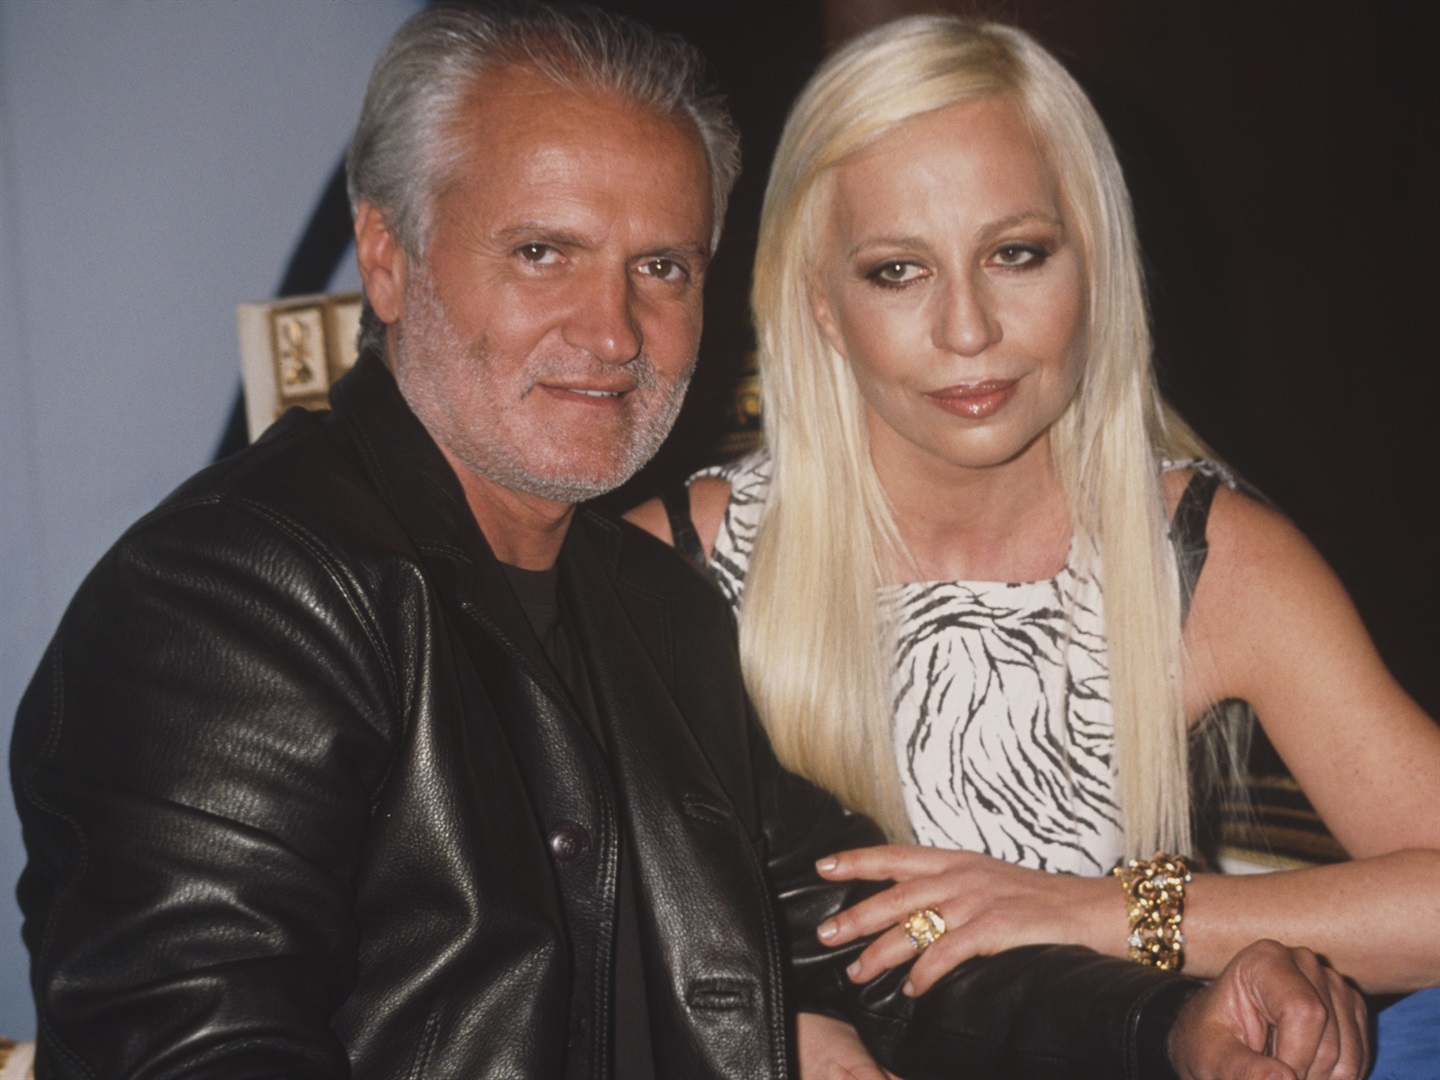 Italian designer Gianni Versace with his sister Donatella in 1996. Gianni was murdered the following year outside his Miami Beach mansion. Rose Hartman/Archive Photos/Getty Images